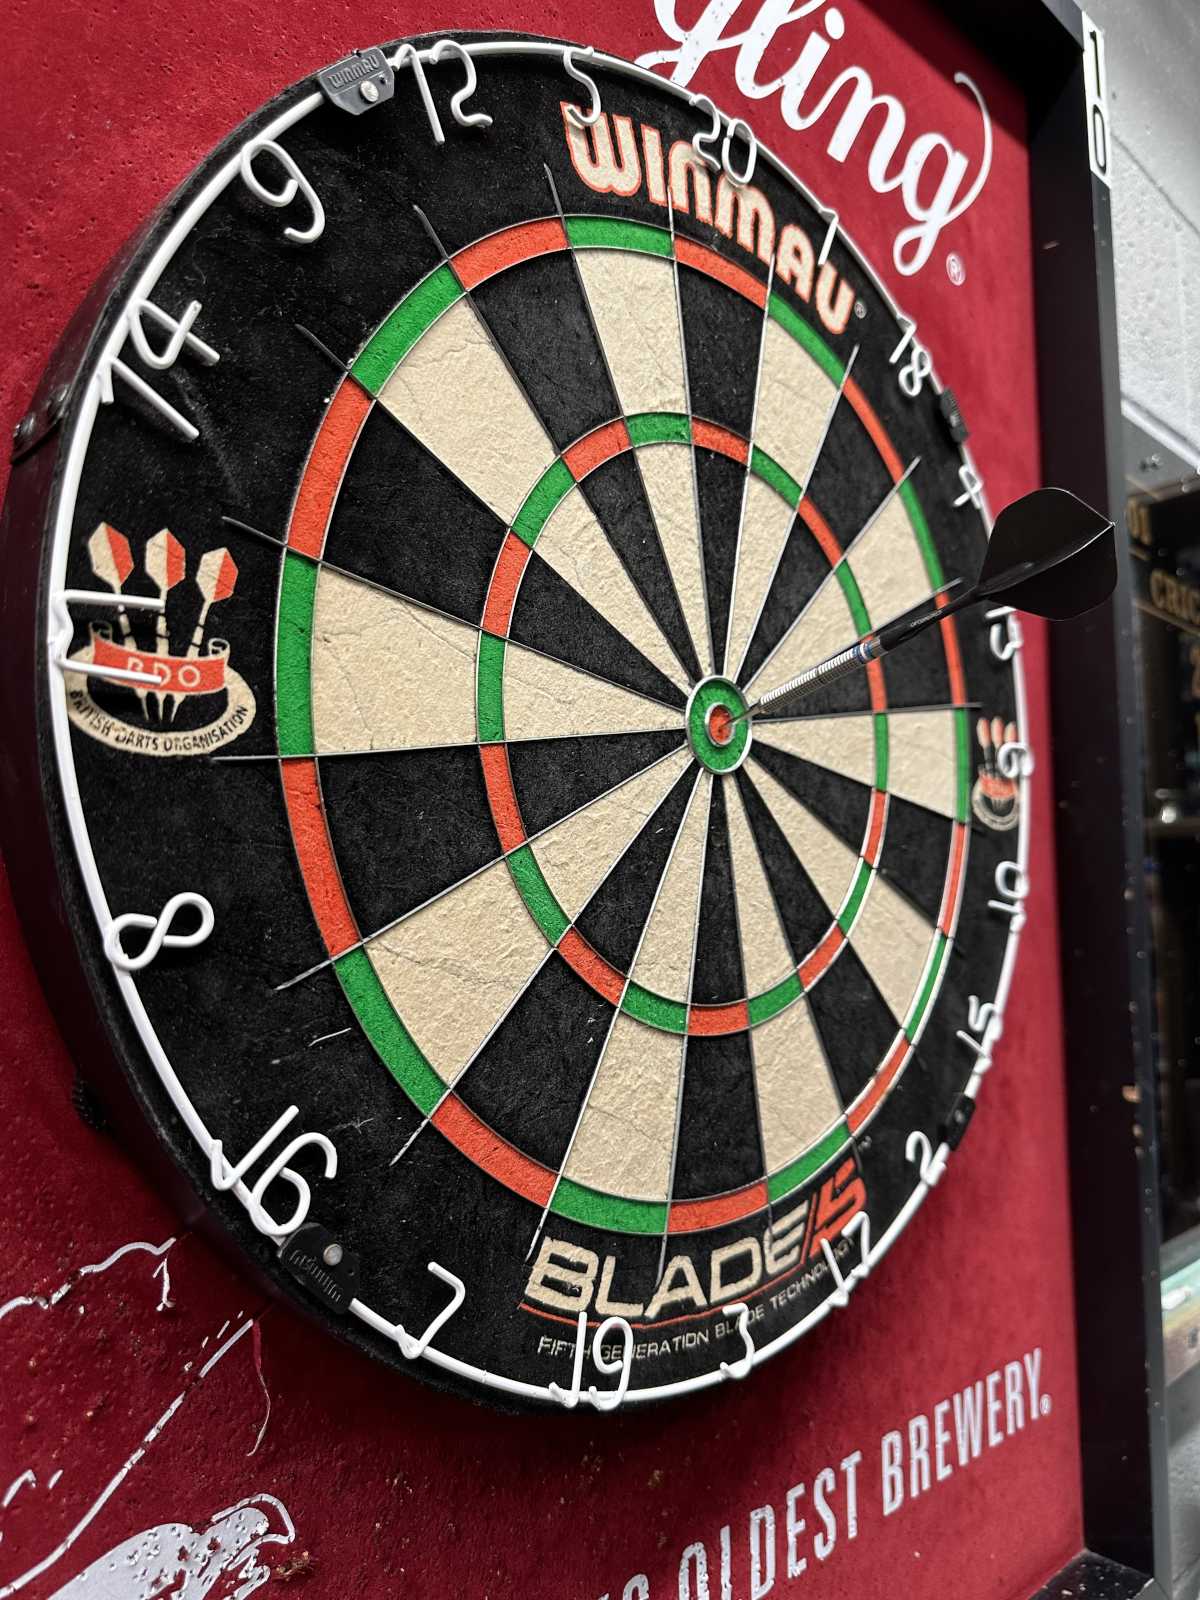 A dart board on the side of a building.